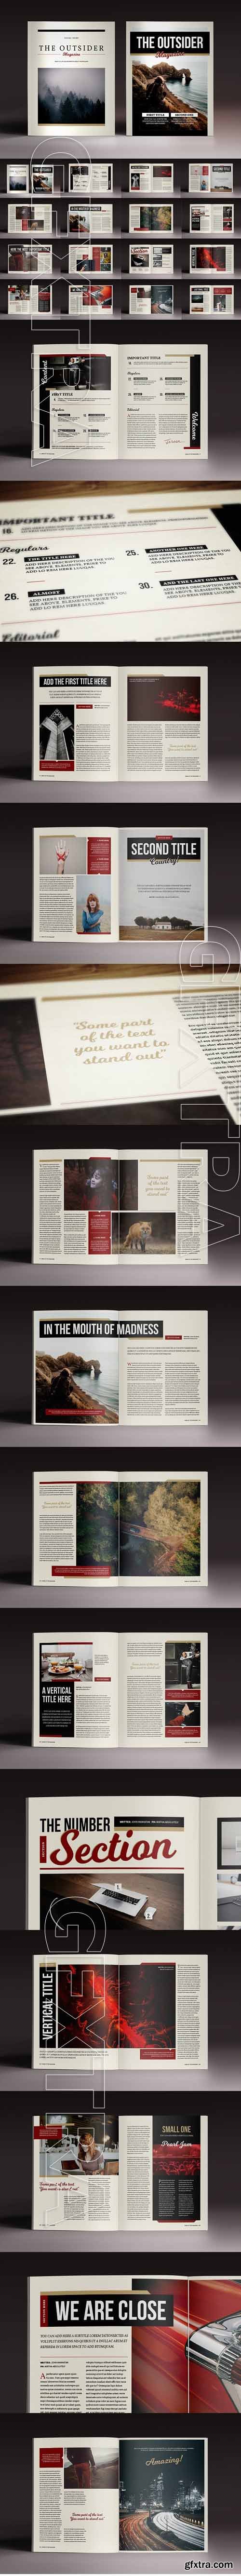 CM - The Outsider Magazine Template 1367568